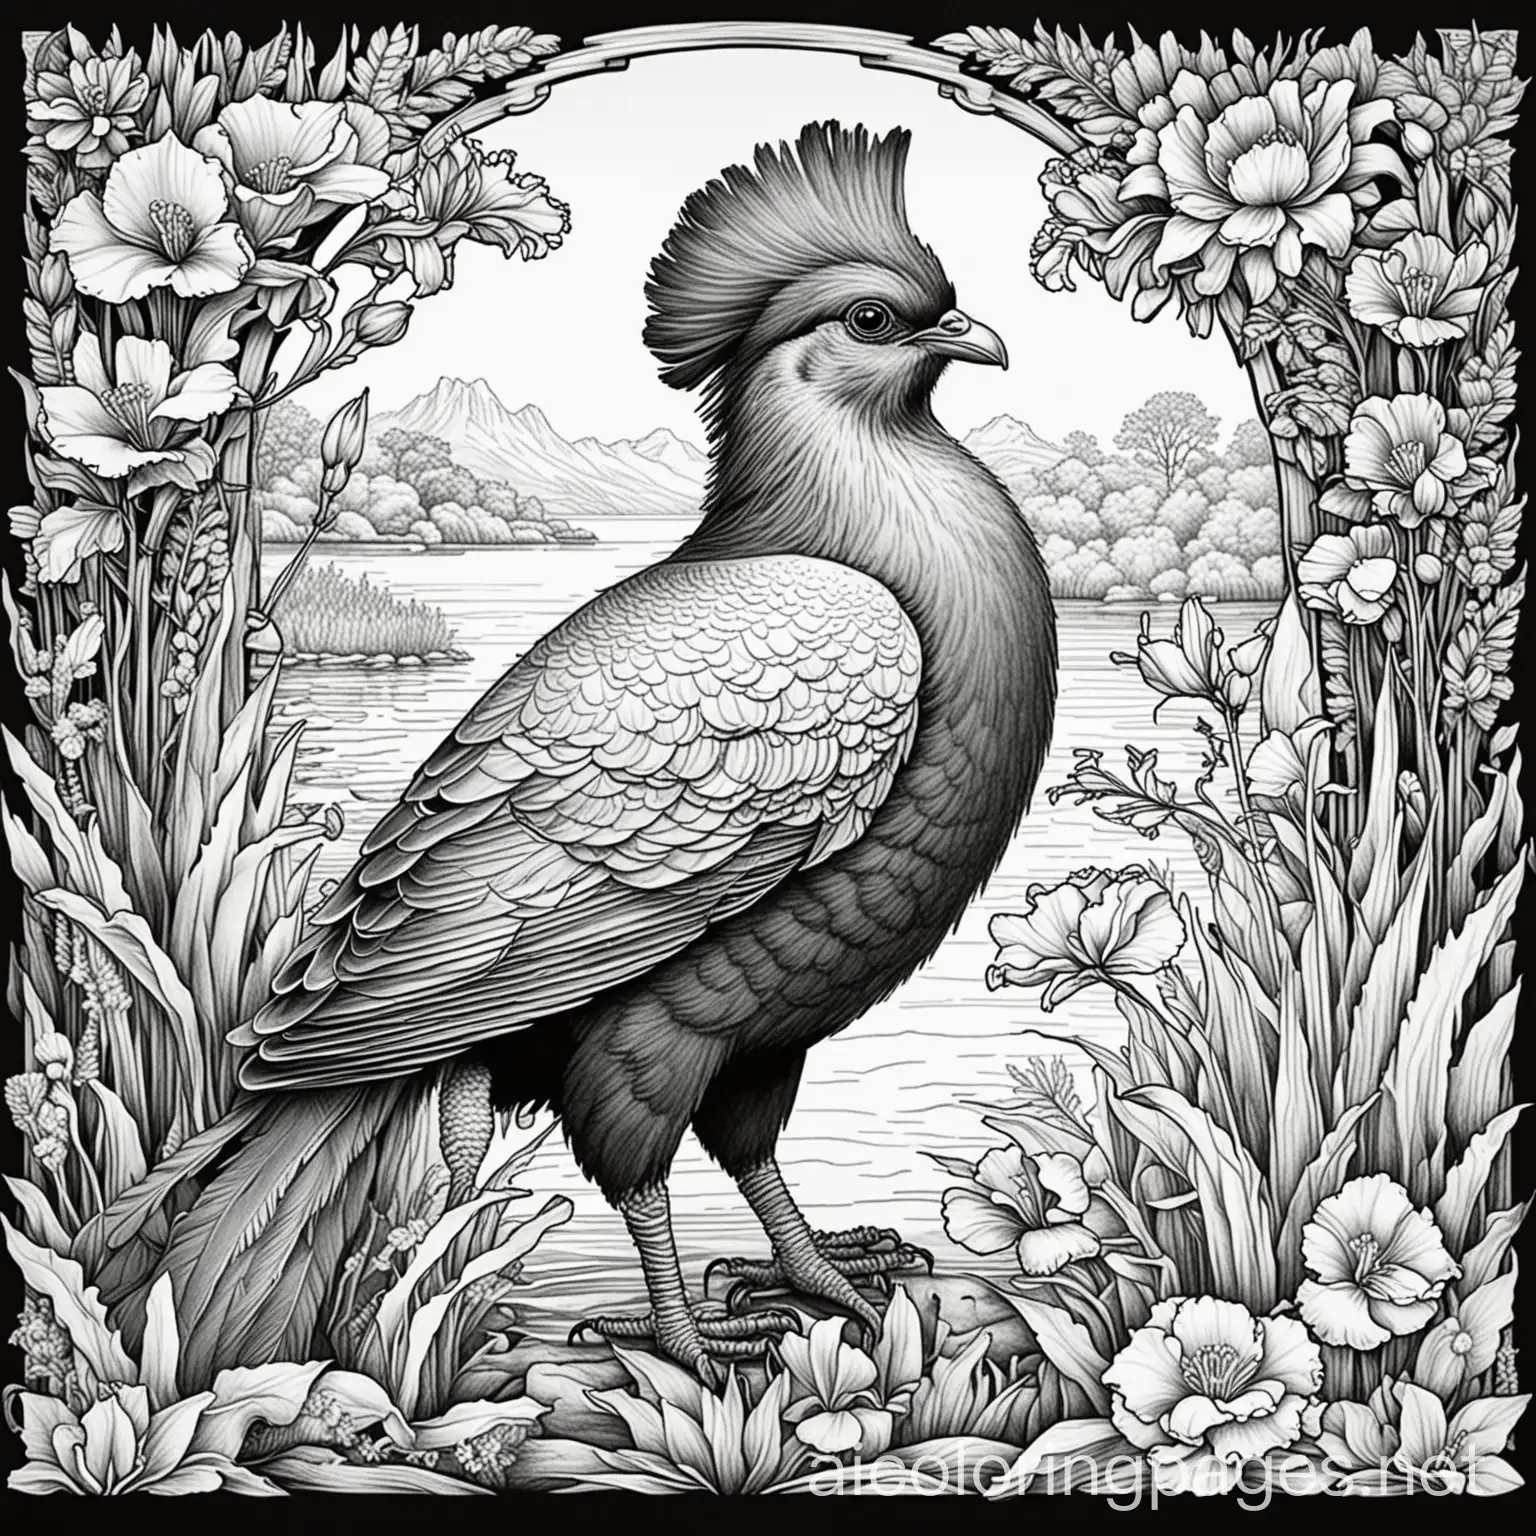 Victoria Crowned Pigeon black and white borders as well as with iris,lavender,daisy,orchid ,tulips and roses in the lake with black and white borders, Coloring Page, black and white, line art, white background, Simplicity, Ample White Space. The background of the coloring page is plain white to make it easy for young children to color within the lines. The outlines of all the subjects are easy to distinguish, making it simple for kids to color without too much difficulty